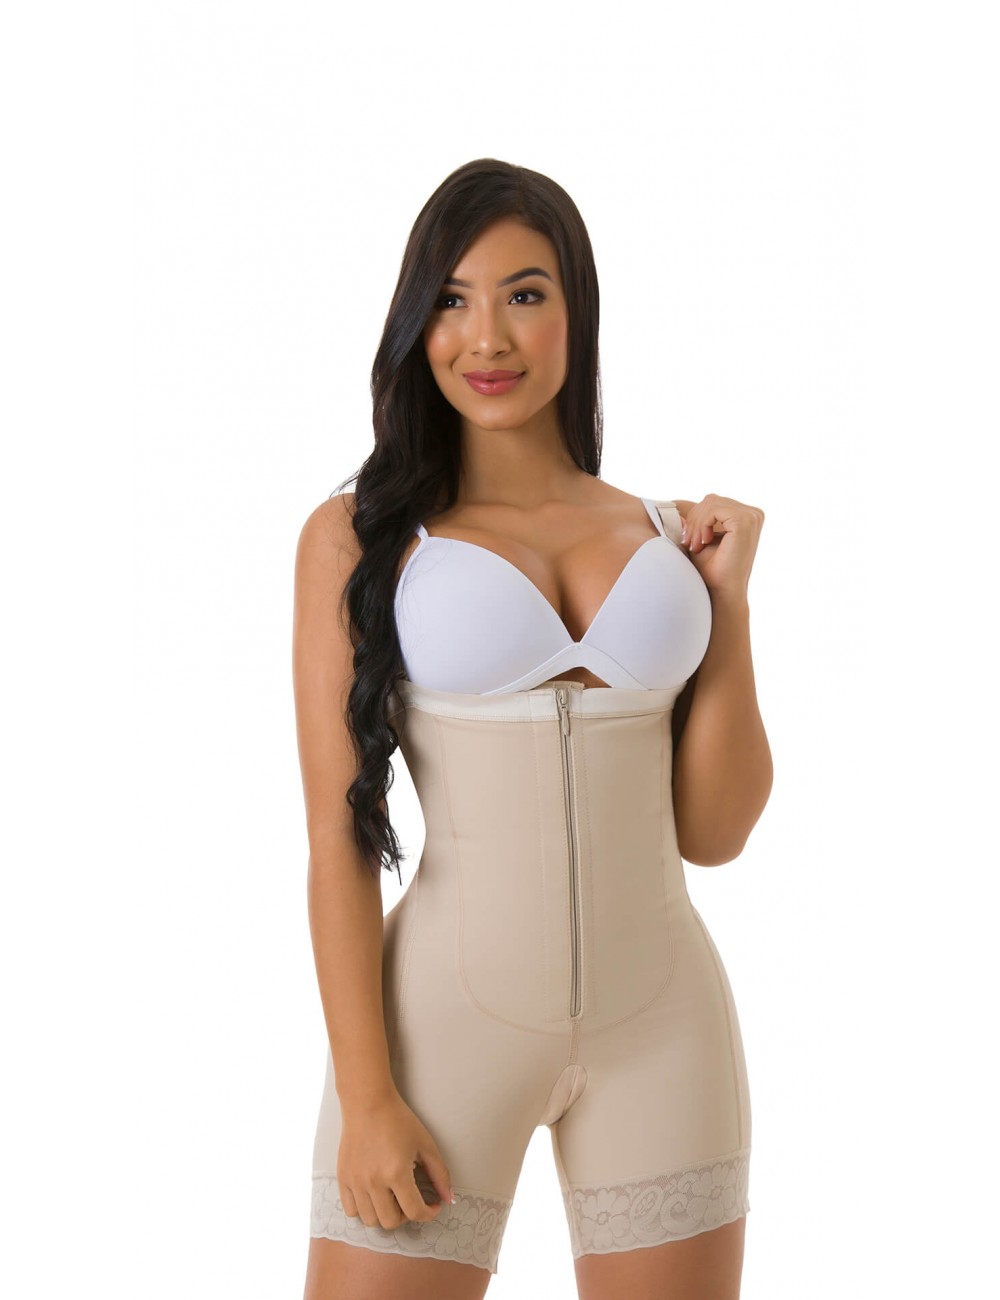 How to Wear Shapewear with Front Hook Correctly?